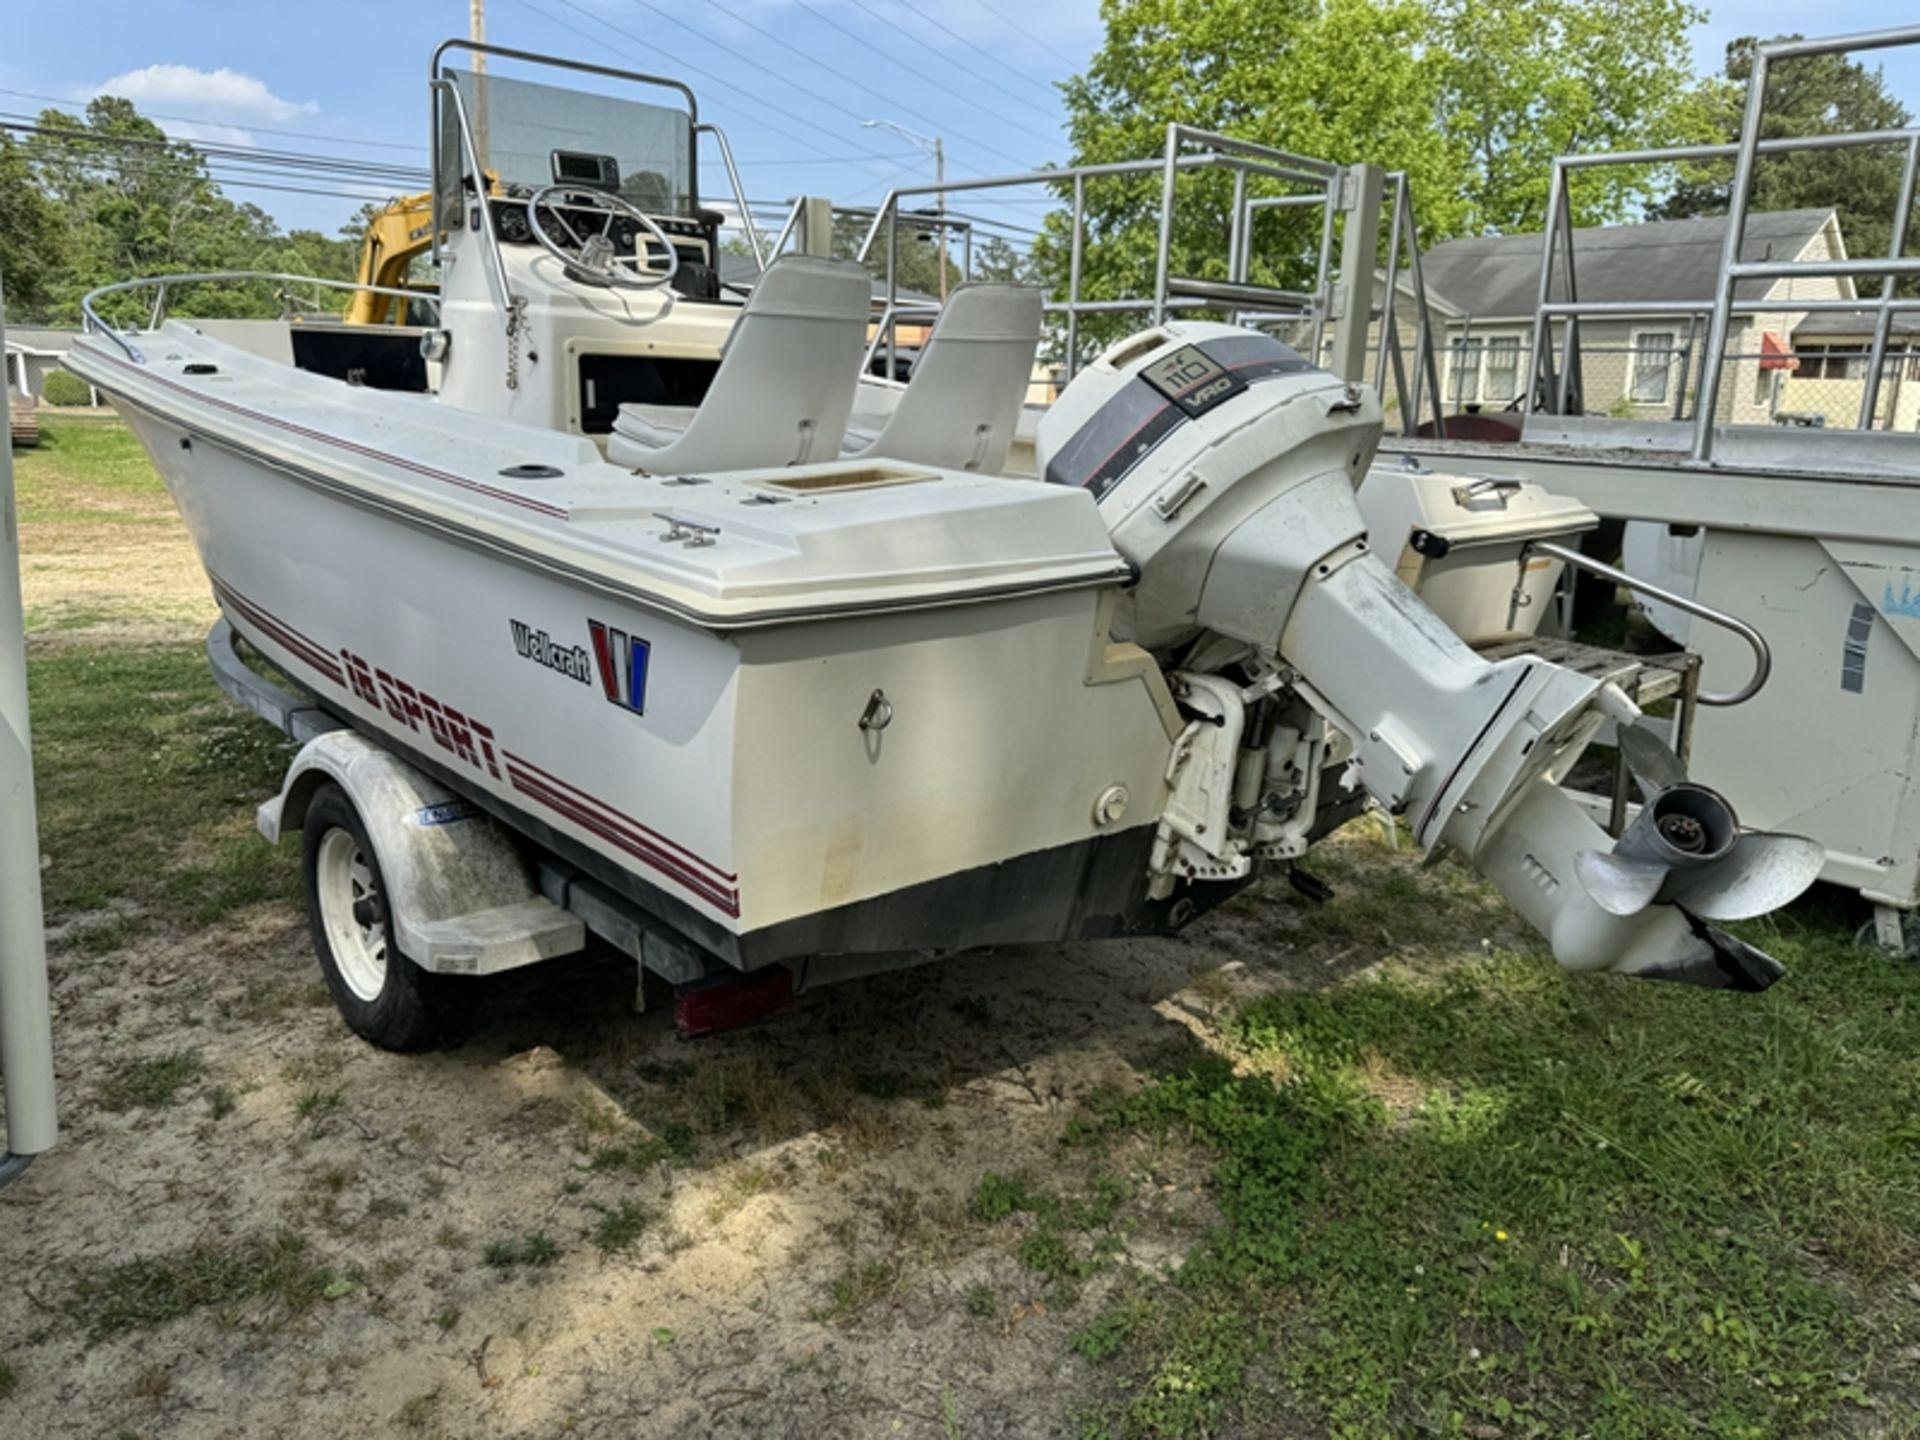 1990 WELLCRAFT 18’ center console with Johnson 110 - WELD3721F990 - Image 4 of 8